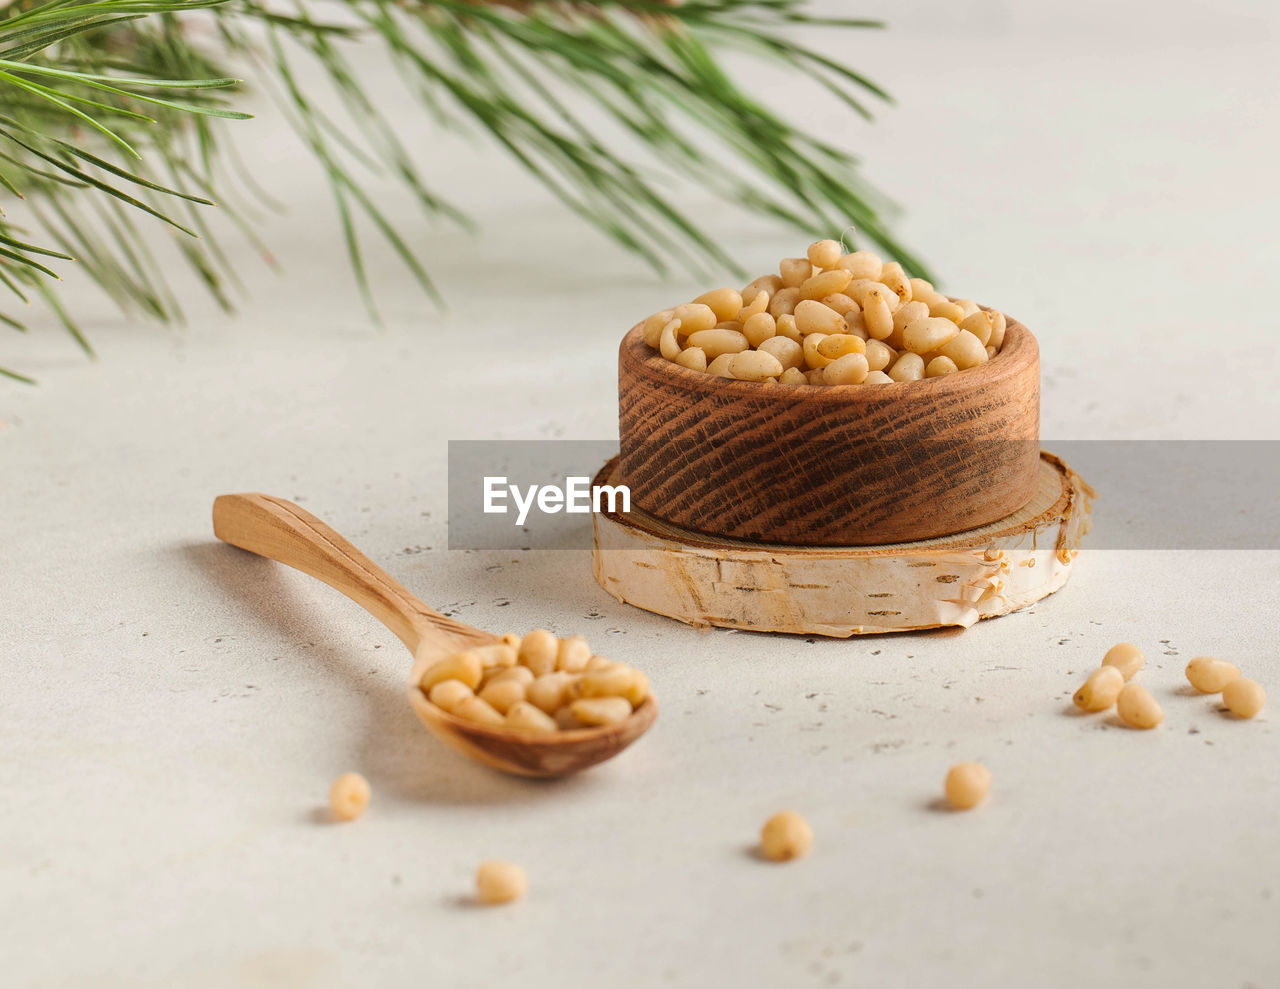 Pine nuts in a wooden bowl and in a wooden spoon on the background of a coniferous branch. 